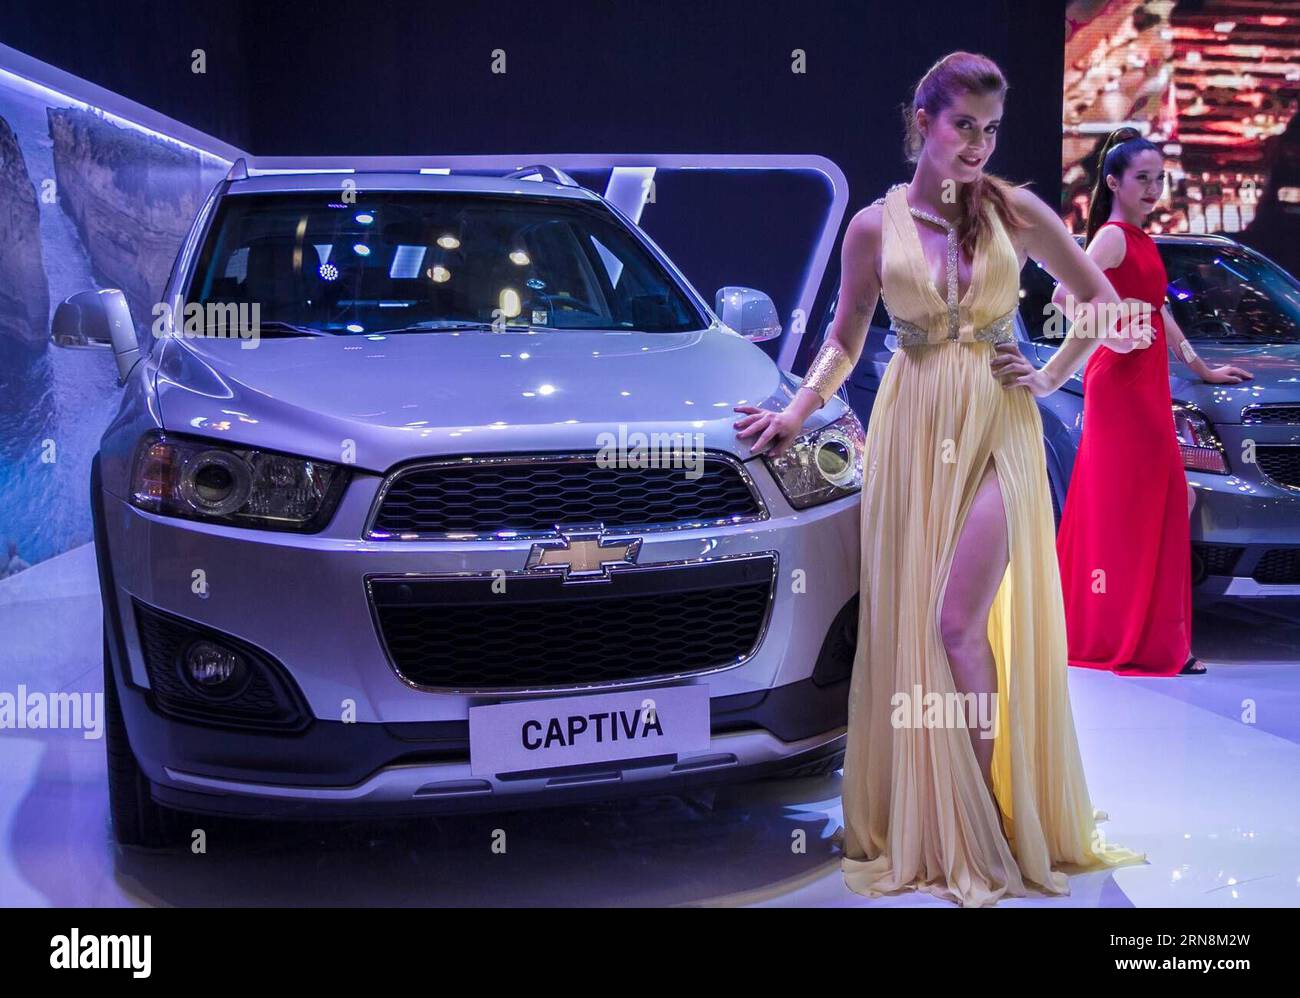 HO CHI MINH CITY, Oct. 28, 2015 -- A model presents a Chevrolet Captiva during the Vietnam Motor Show 2015 at Saigon Exhibition and Convention Centre in Ho Chi Minh city, Vietnam, Oct. 28, 2015. Vietnam Motor Show 2015, the biggest annual event of the Vietnamese auto industry, opens from Oct. 28 to Nov. 1. ) VIETNAM-HO CHI MINH CITY-VIETNAM MOTOR SHOW 2015 NguyenxLexHuyen PUBLICATIONxNOTxINxCHN   Ho Chi Minh City OCT 28 2015 a Model Presents a Chevrolet Captiva during The Vietnam Engine Show 2015 AT Saigon Exhibition and Convention Centre in Ho Chi Minh City Vietnam OCT 28 2015 Vietnam Engine Stock Photo